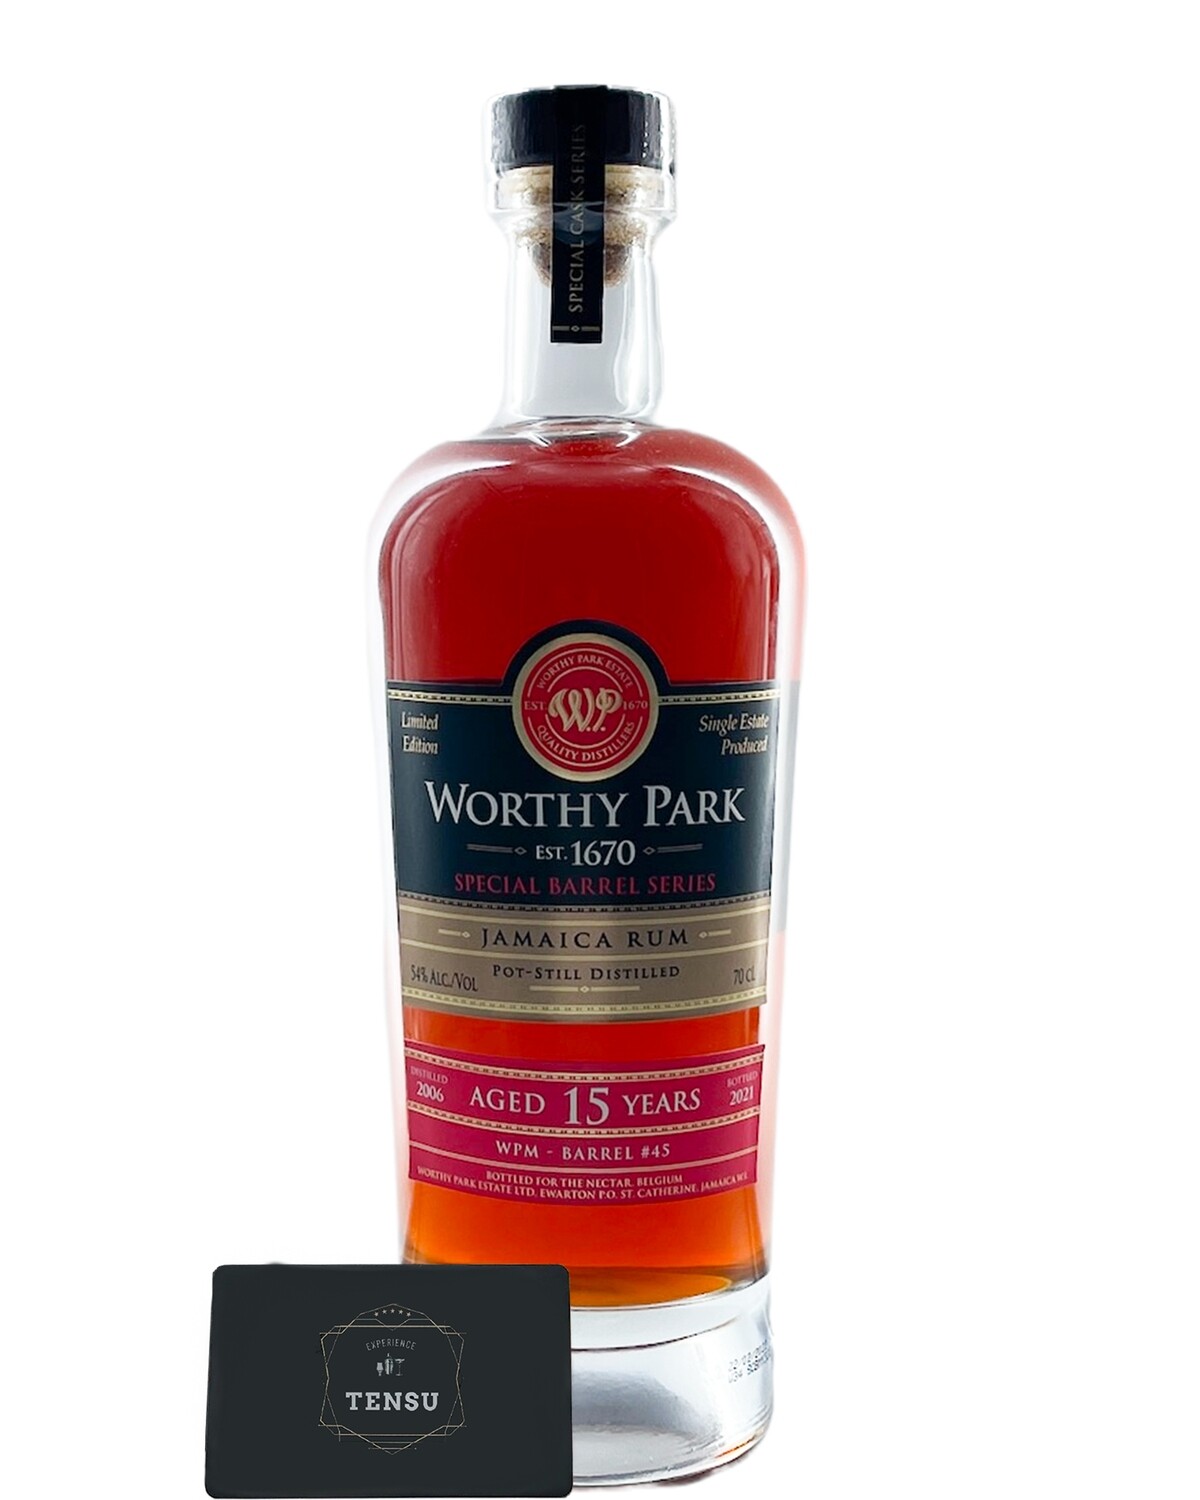 Worthy Park Special Barrel Series (2006-2021) WPM 54,0 "The Nectar"